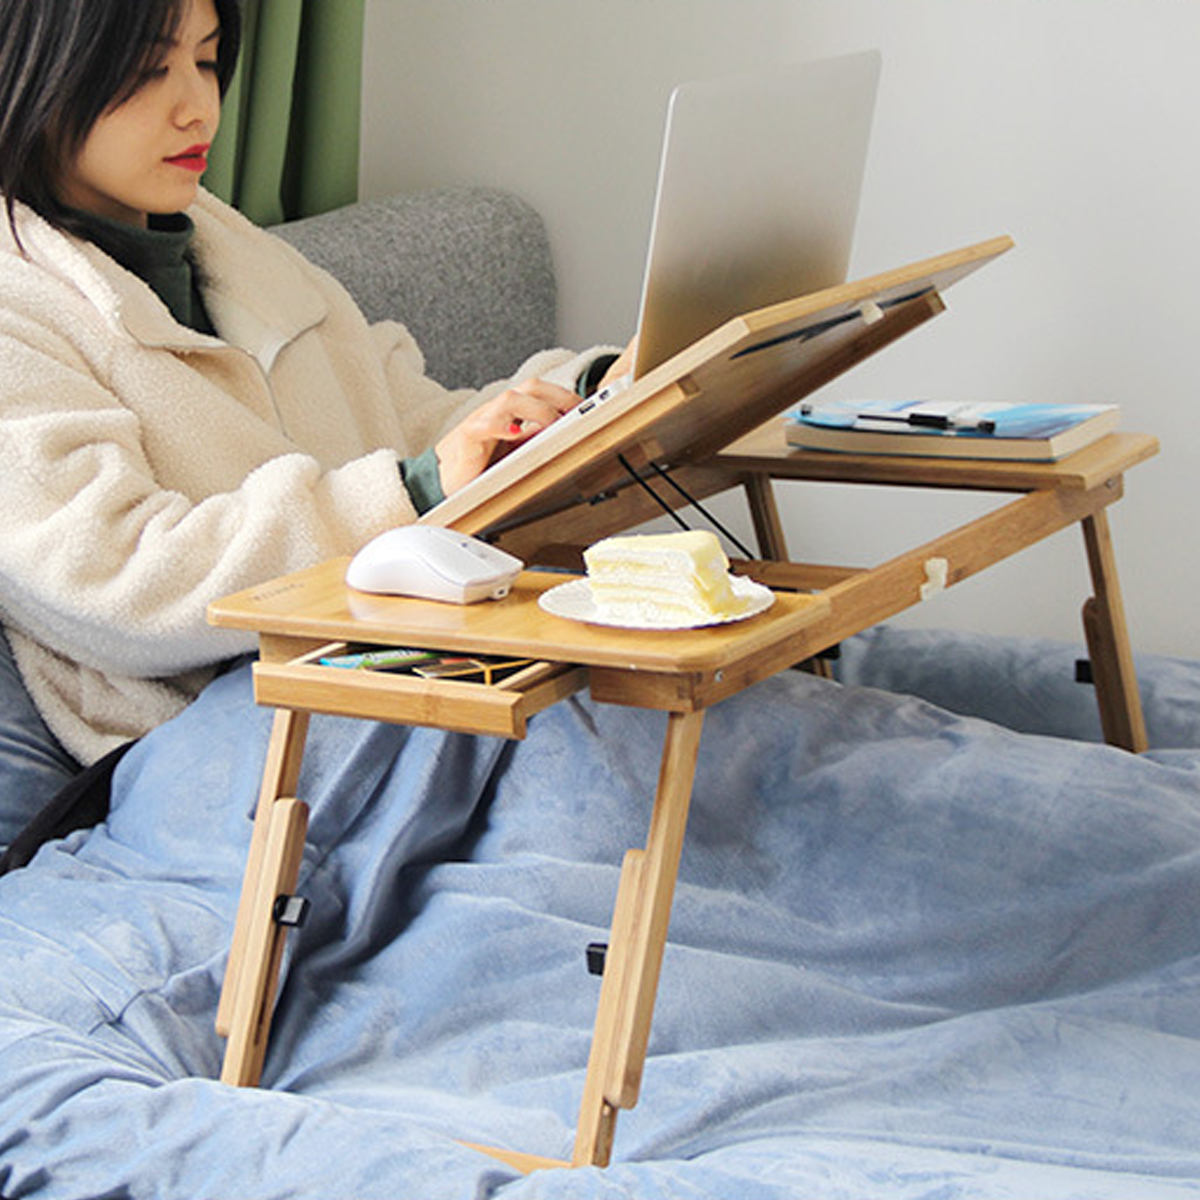 Foldable-Laptop-Desk-Portable-Height-Adjustable-Computer-Stand-Bamboo-Tea-Serving-Tray-Bed-Dining-Ta-1796097-7